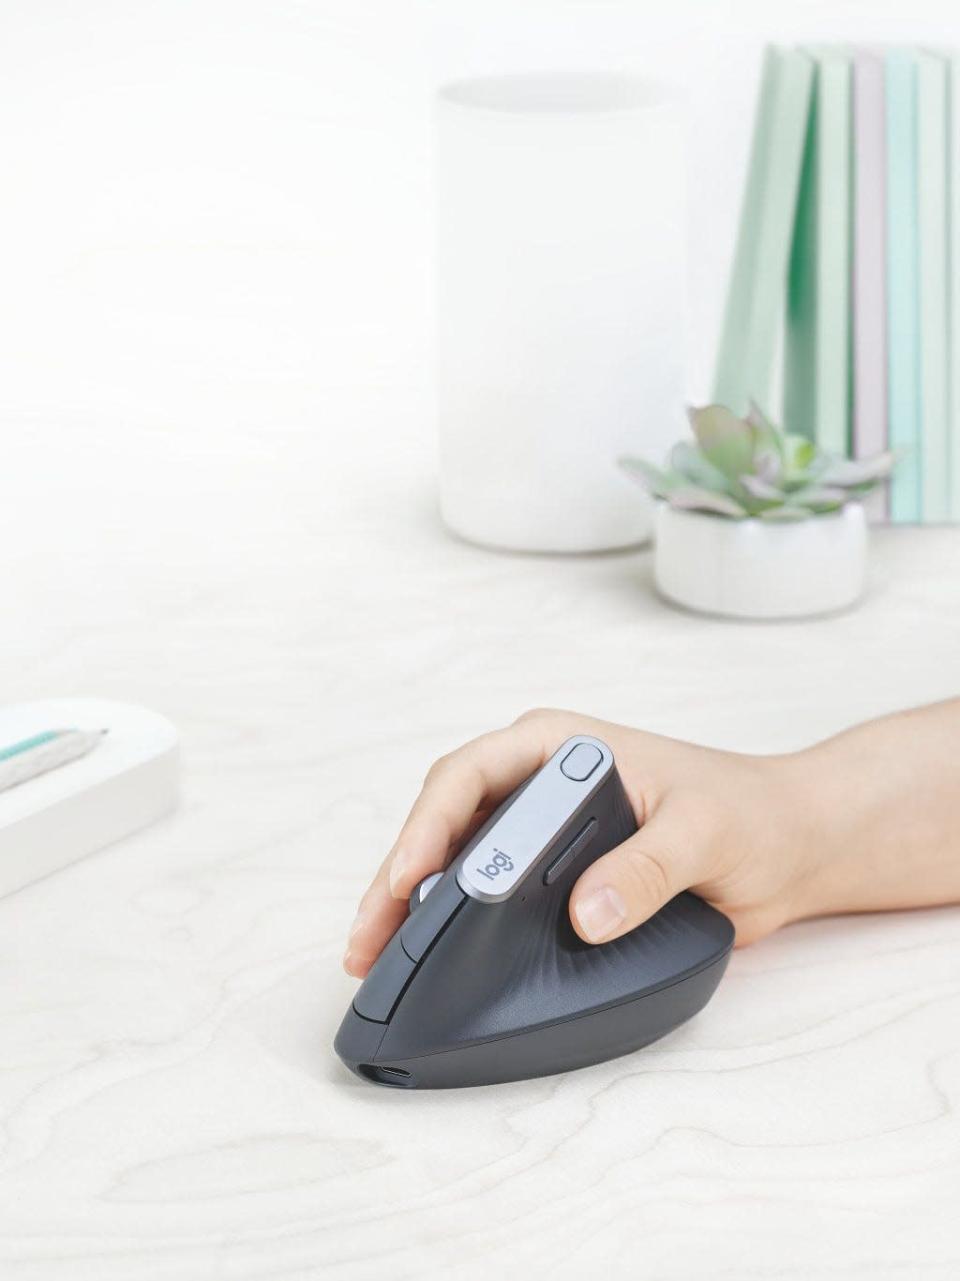 Logitech&#x002019;s MX Vertical Advanced Ergonomic Mouse ($99) features a 57-degree vertical angle that allows for a &#x002018;handshake&#x002019; grip for greater comfort.